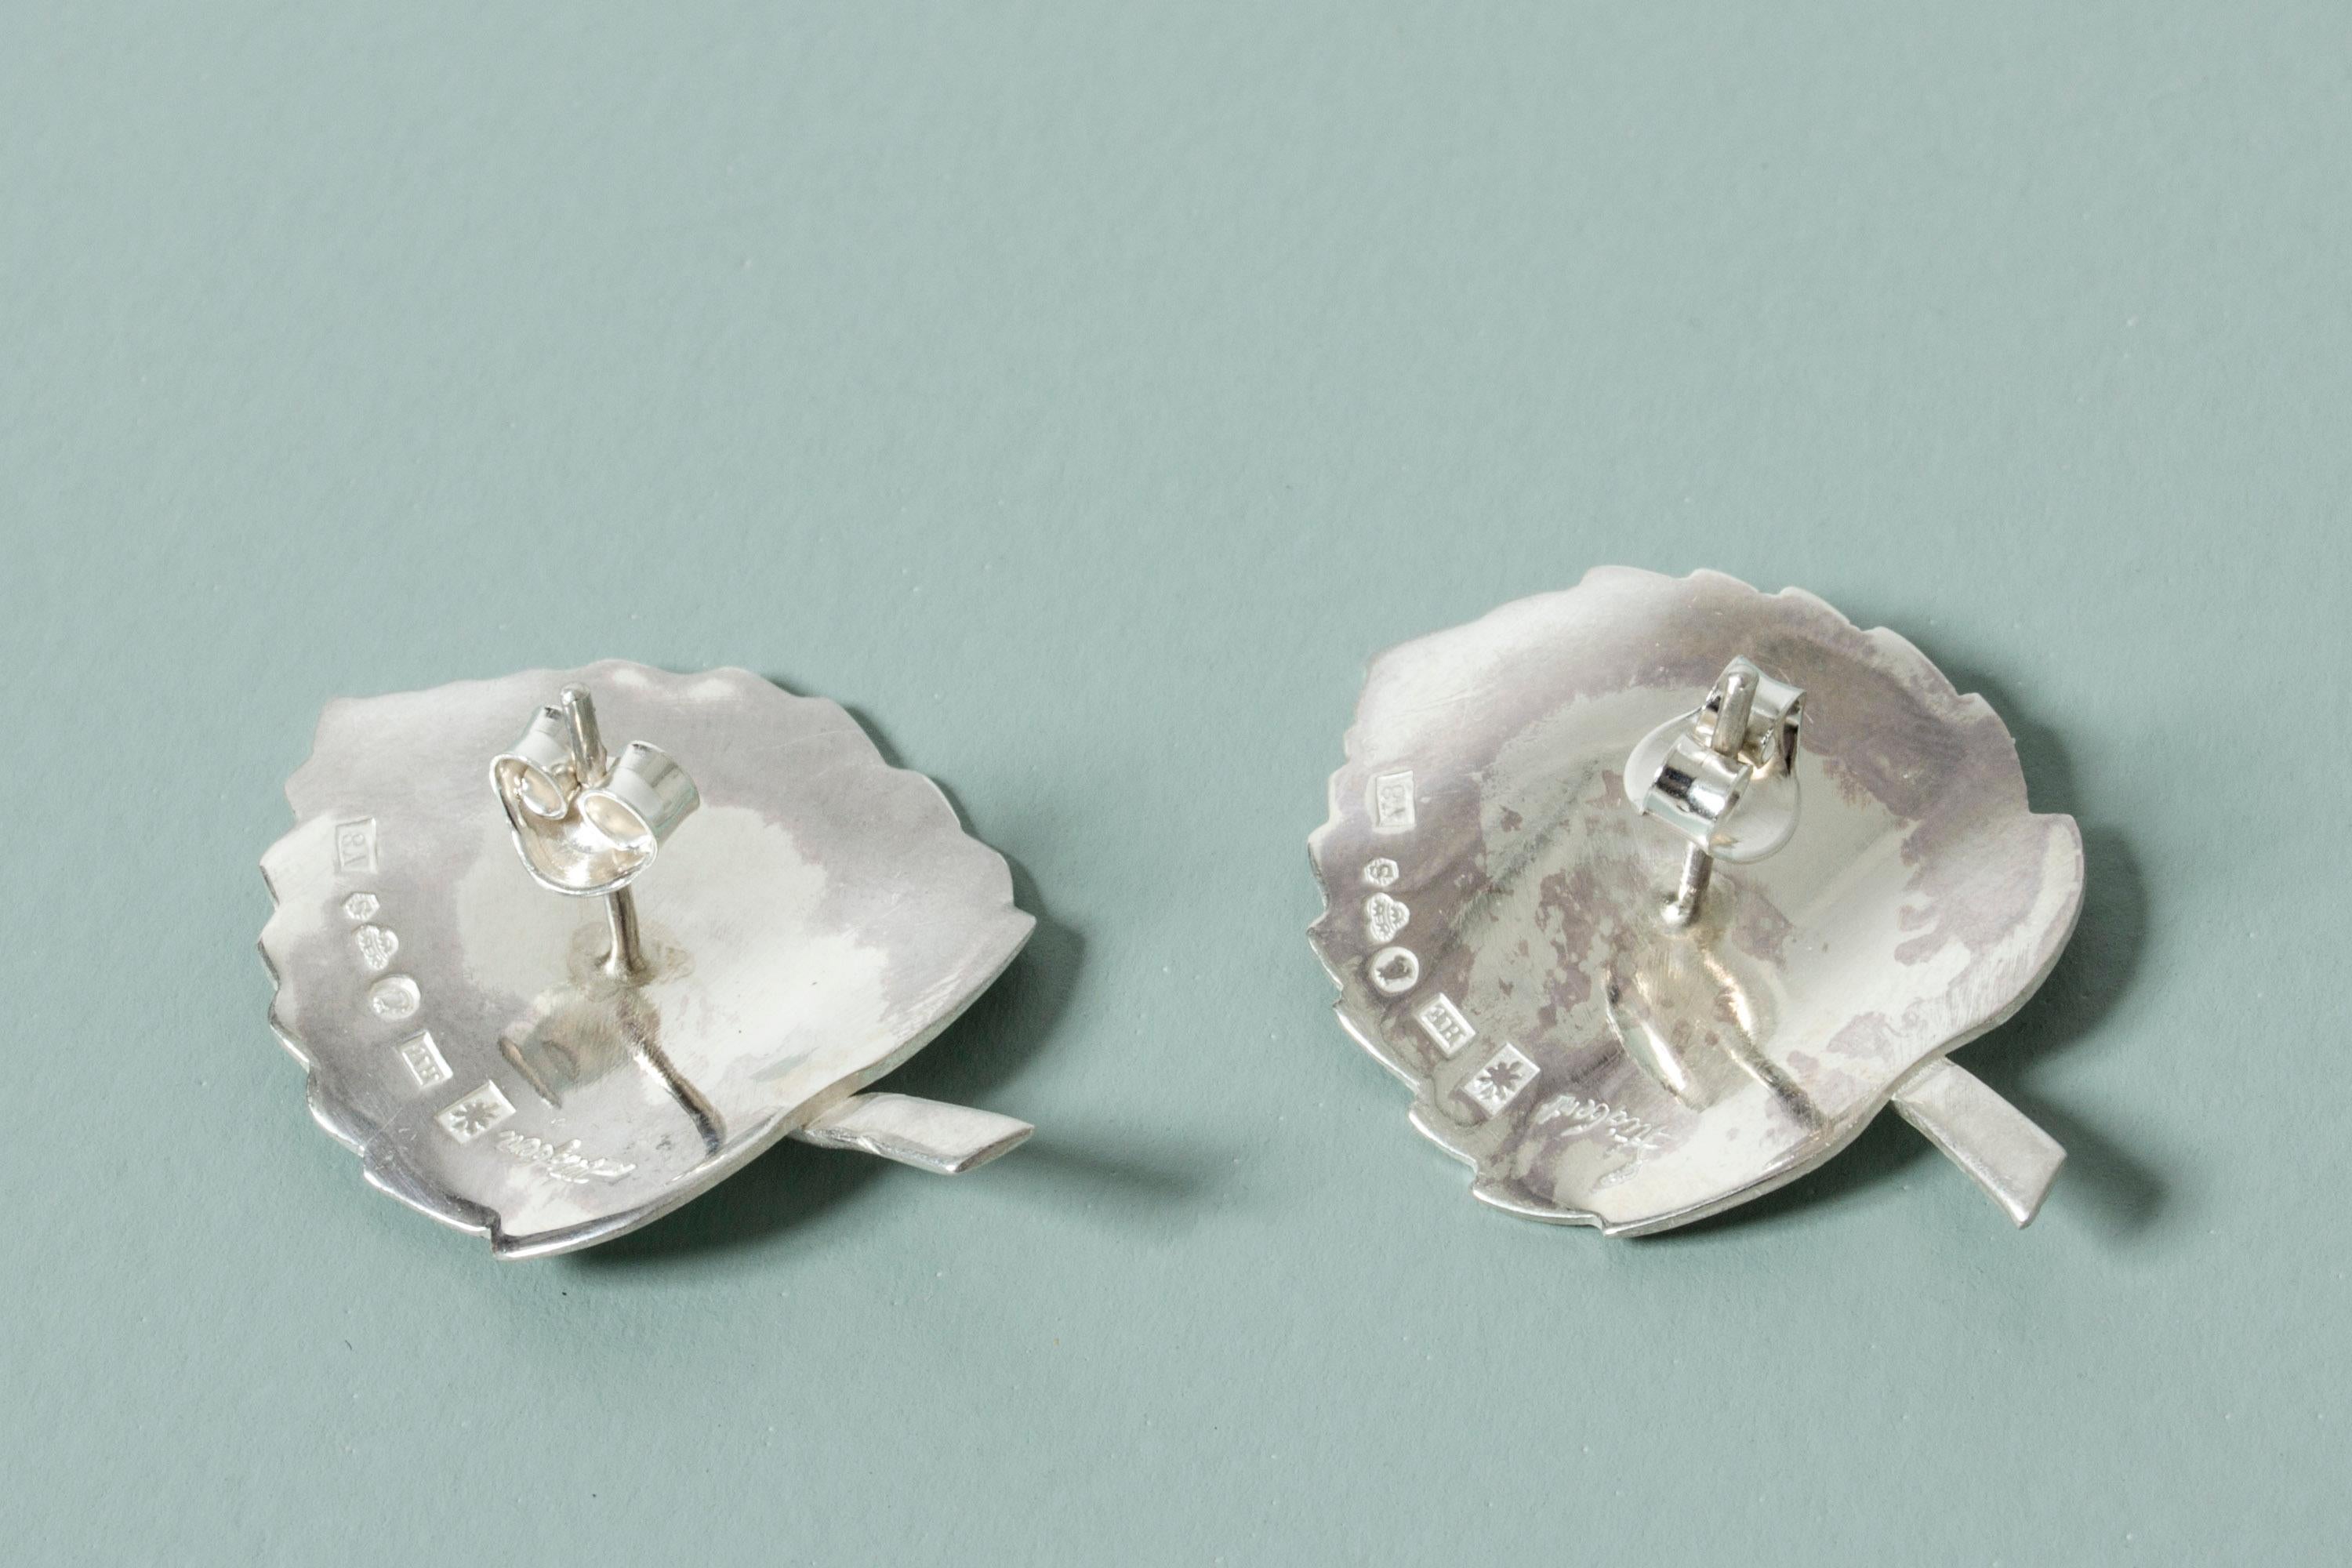 Pair of Silver Earrings by Sigurd Persson for Stigbert, Sweden, 1947 2